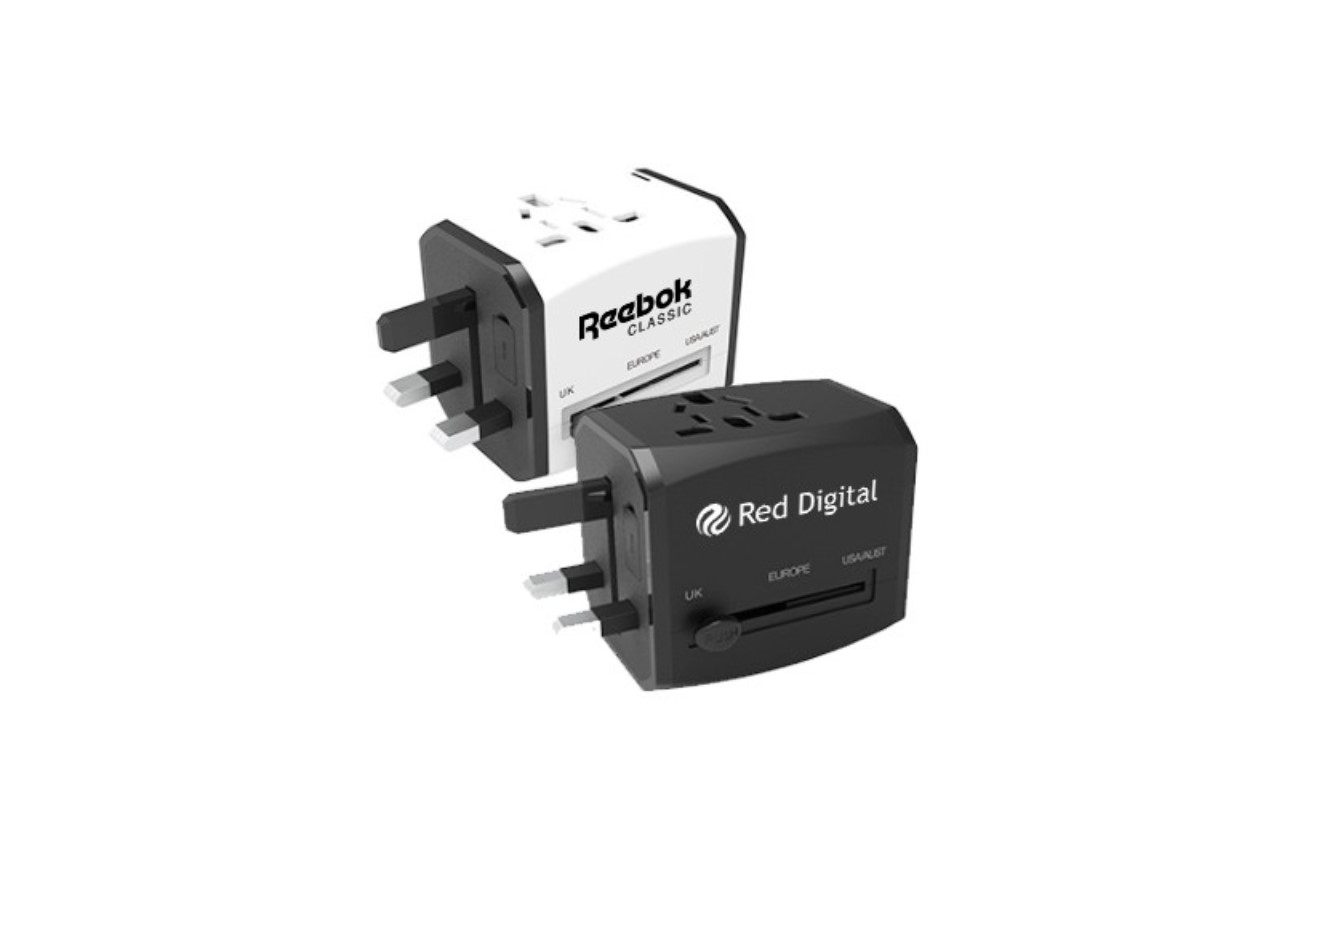 HITEC Travel Adapter Dual USB and Type-C Charger